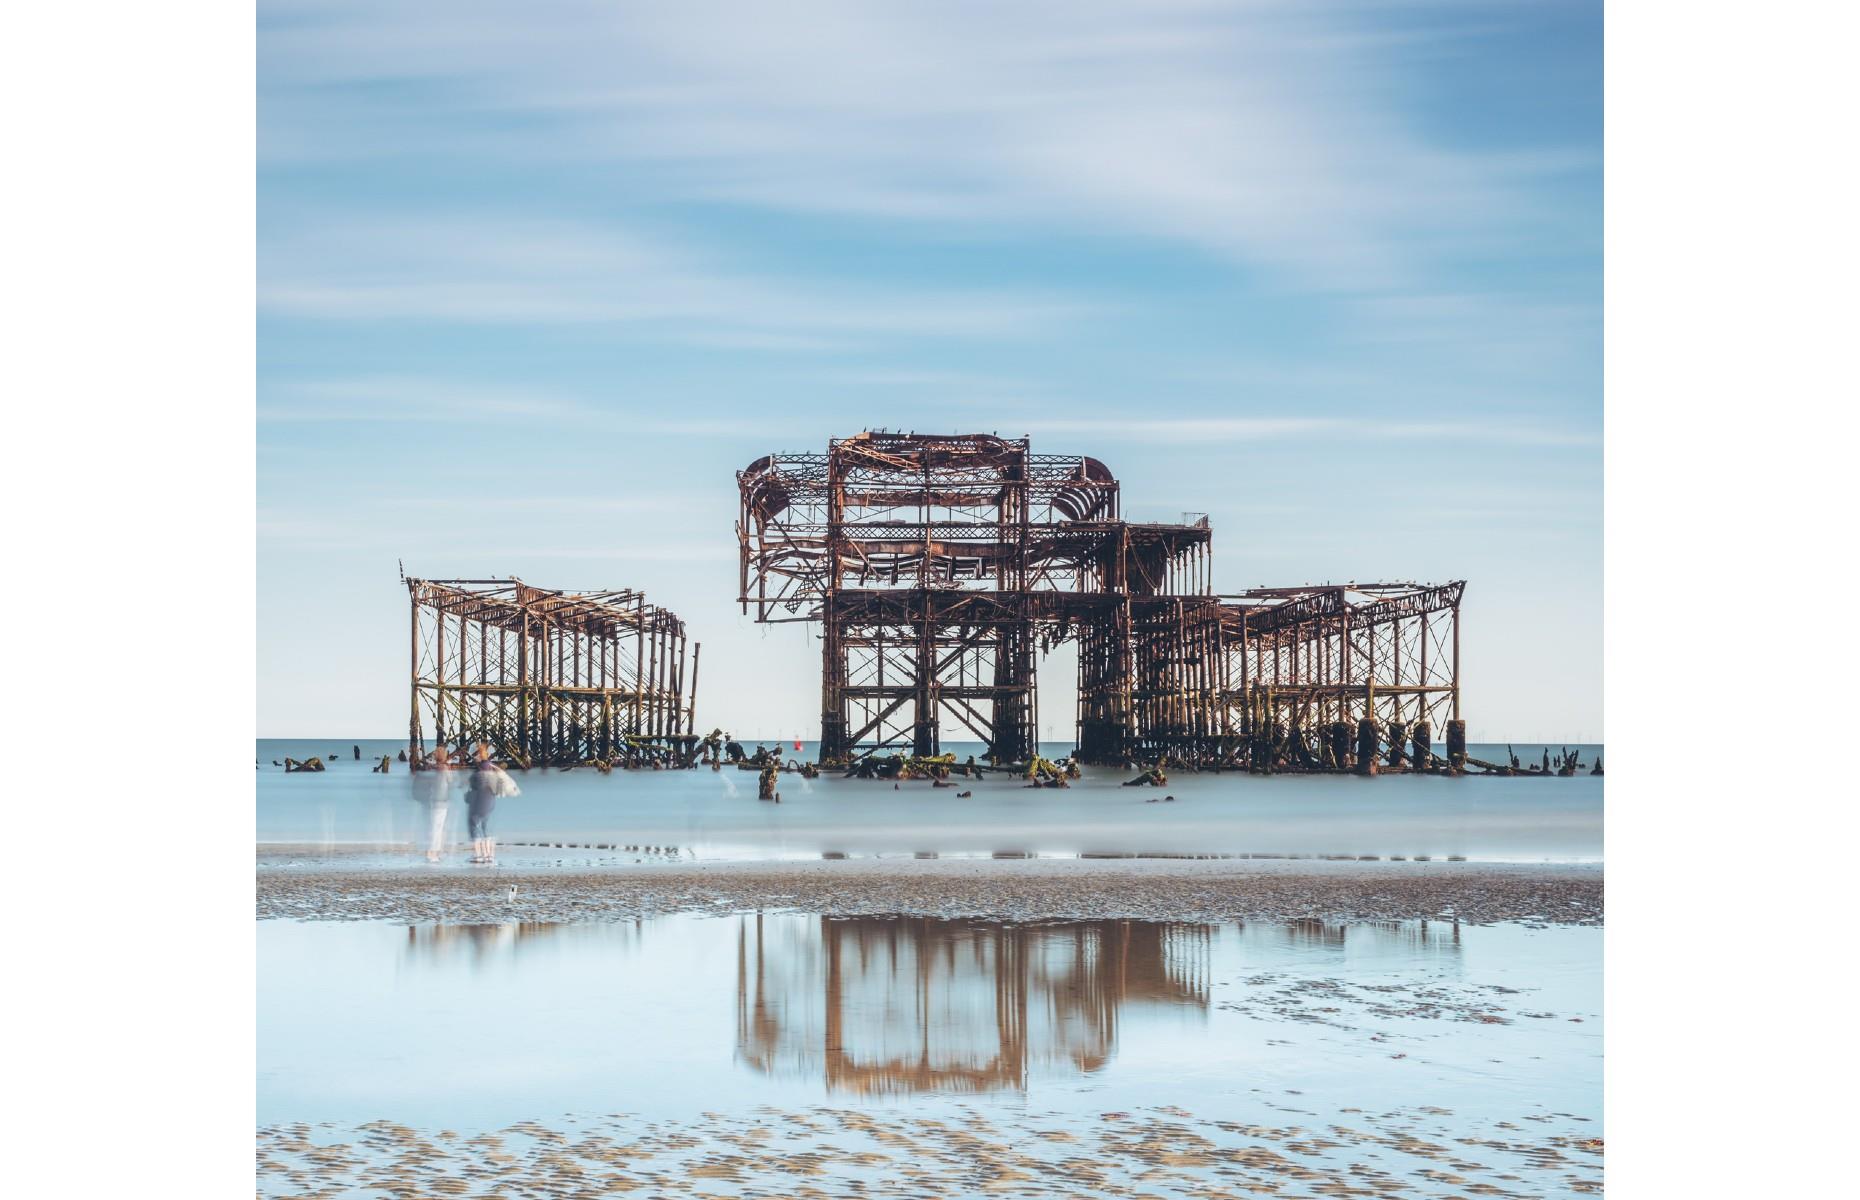 <p>While tourists flock to <a href="https://www.loveexploring.com/news/138874/best-things-to-do-in-brighton">Brighton</a>'s newer Palace Pier for fairground rides and candyfloss, photographers are generally more taken in by the skeletal remains of West Pier. Opened in 1866 but destroyed by storms and fires, the eerie remains of the landmark look especially poignant in this impressive shot by Darren Smith, with two ghostly figures making an appearance on the shore. </p>